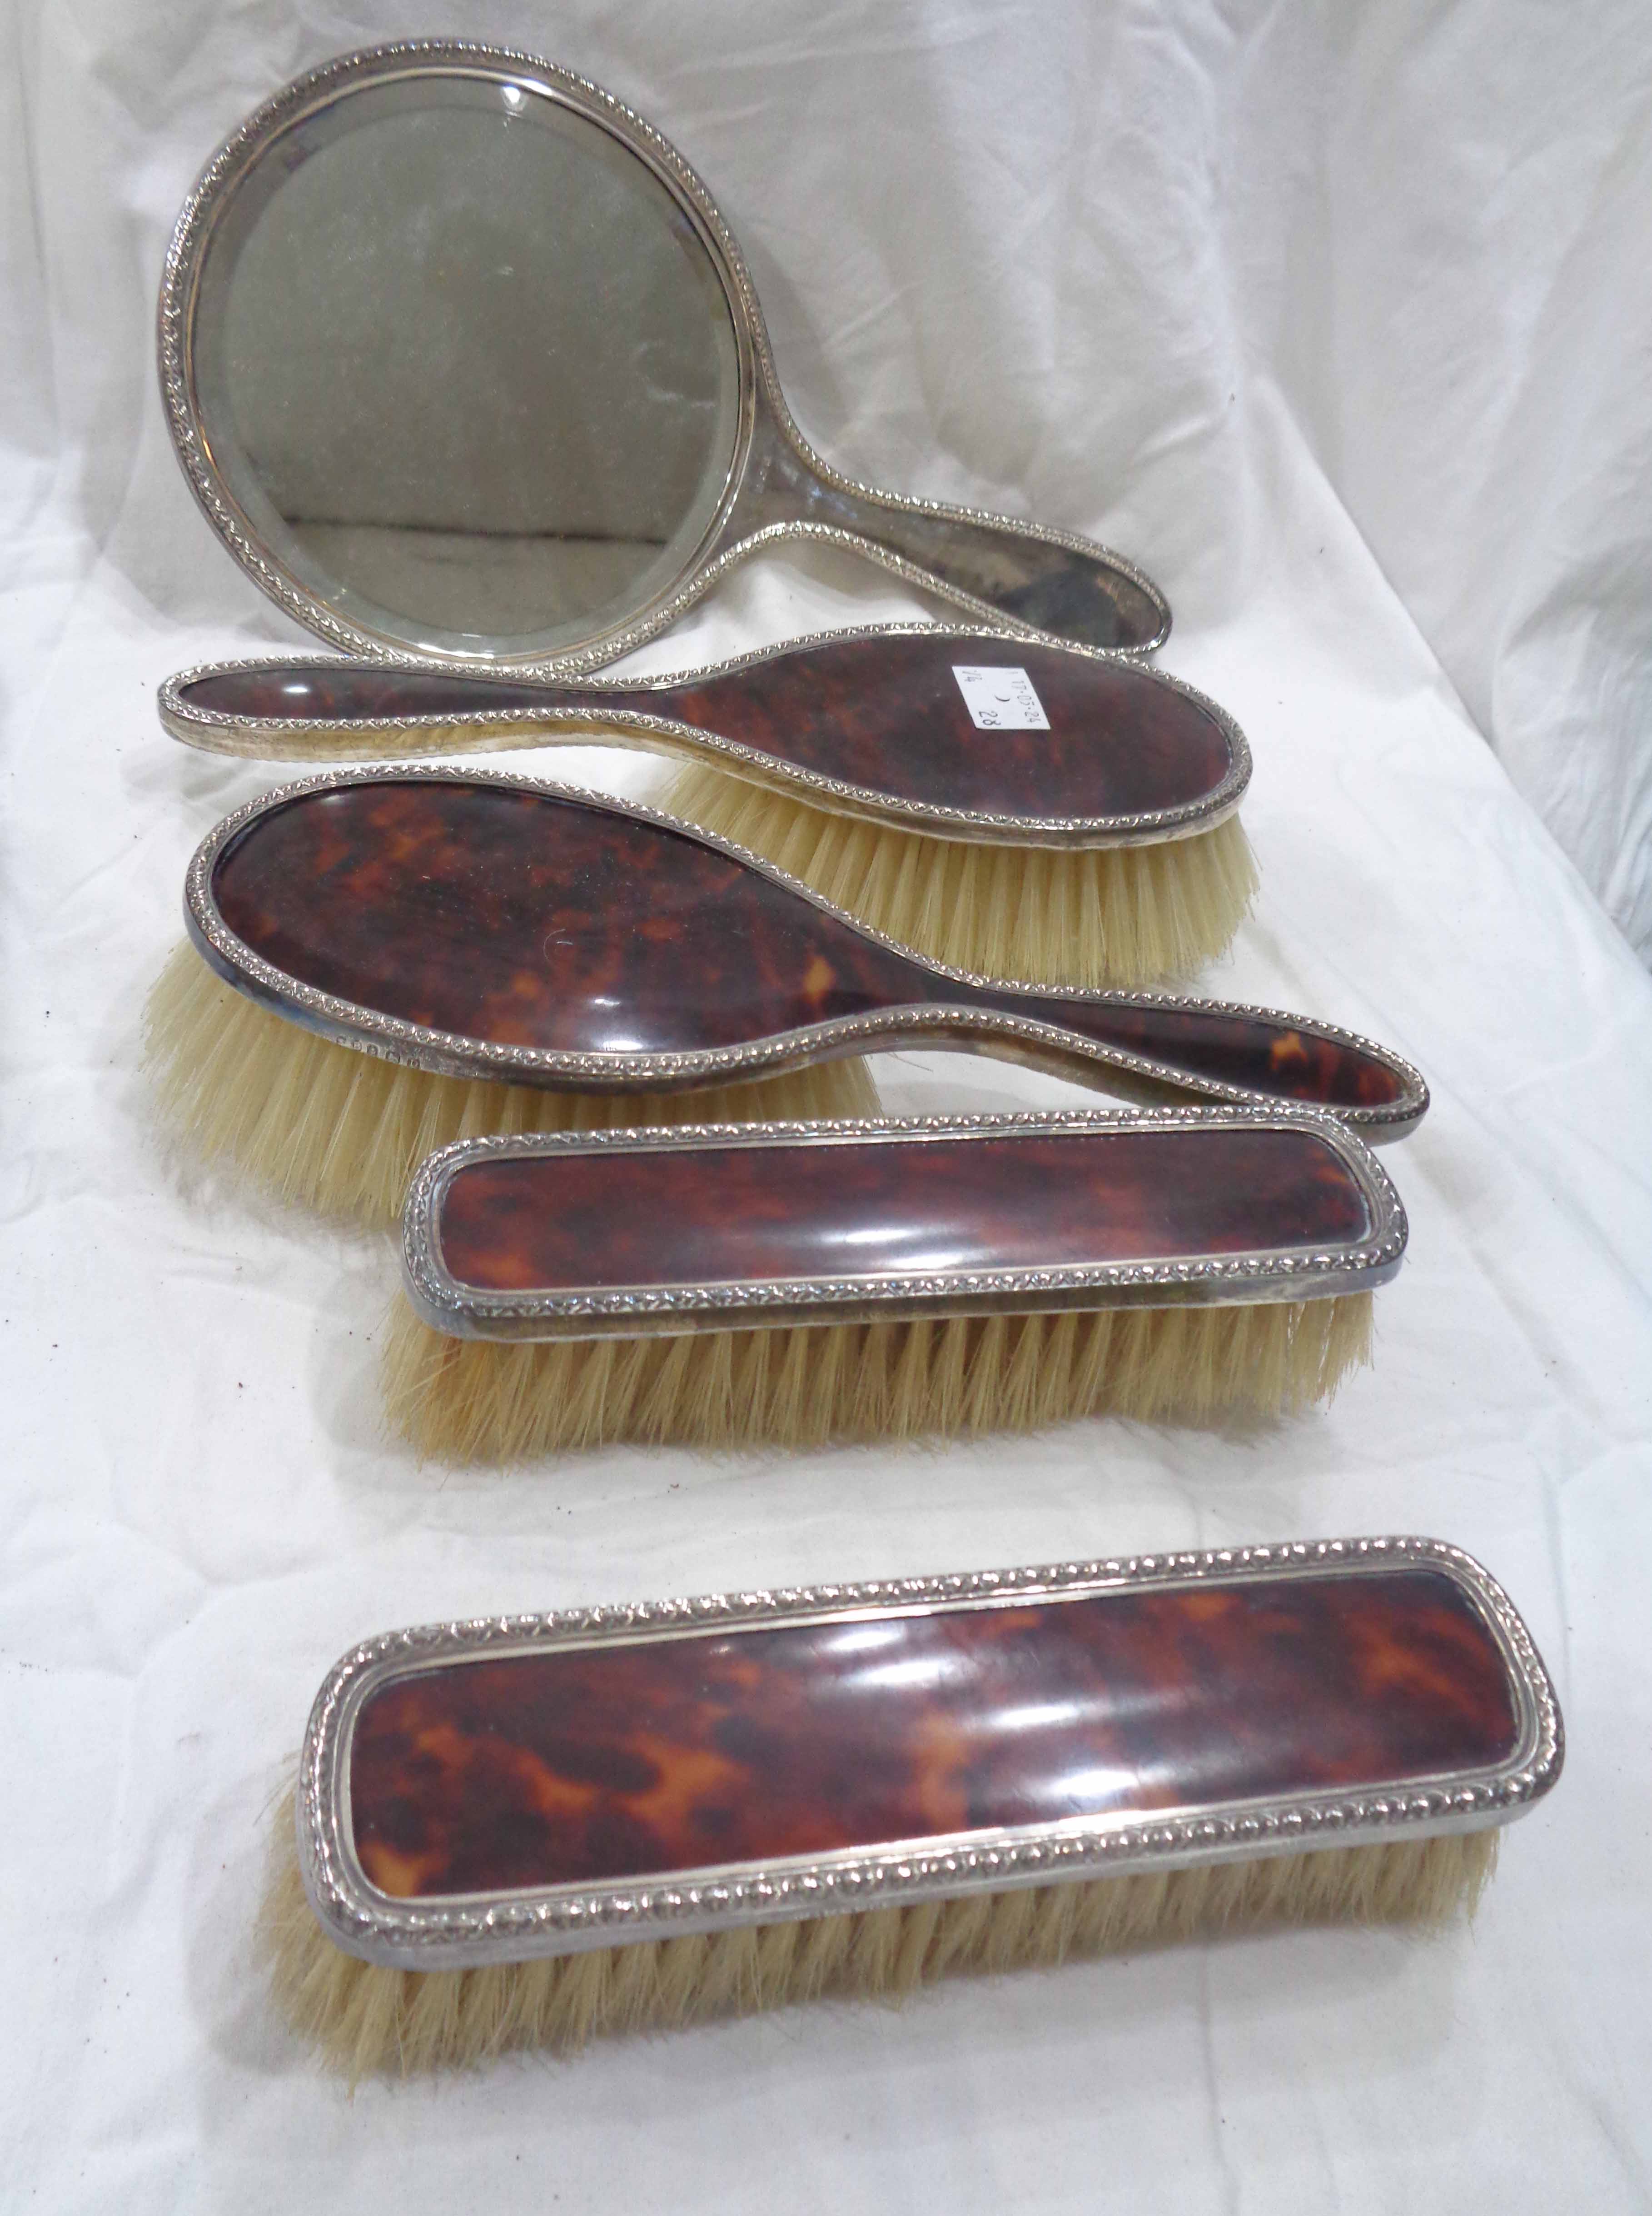 A harlequin five piece silver and tortoiseshell mounted hand mirror and brush set